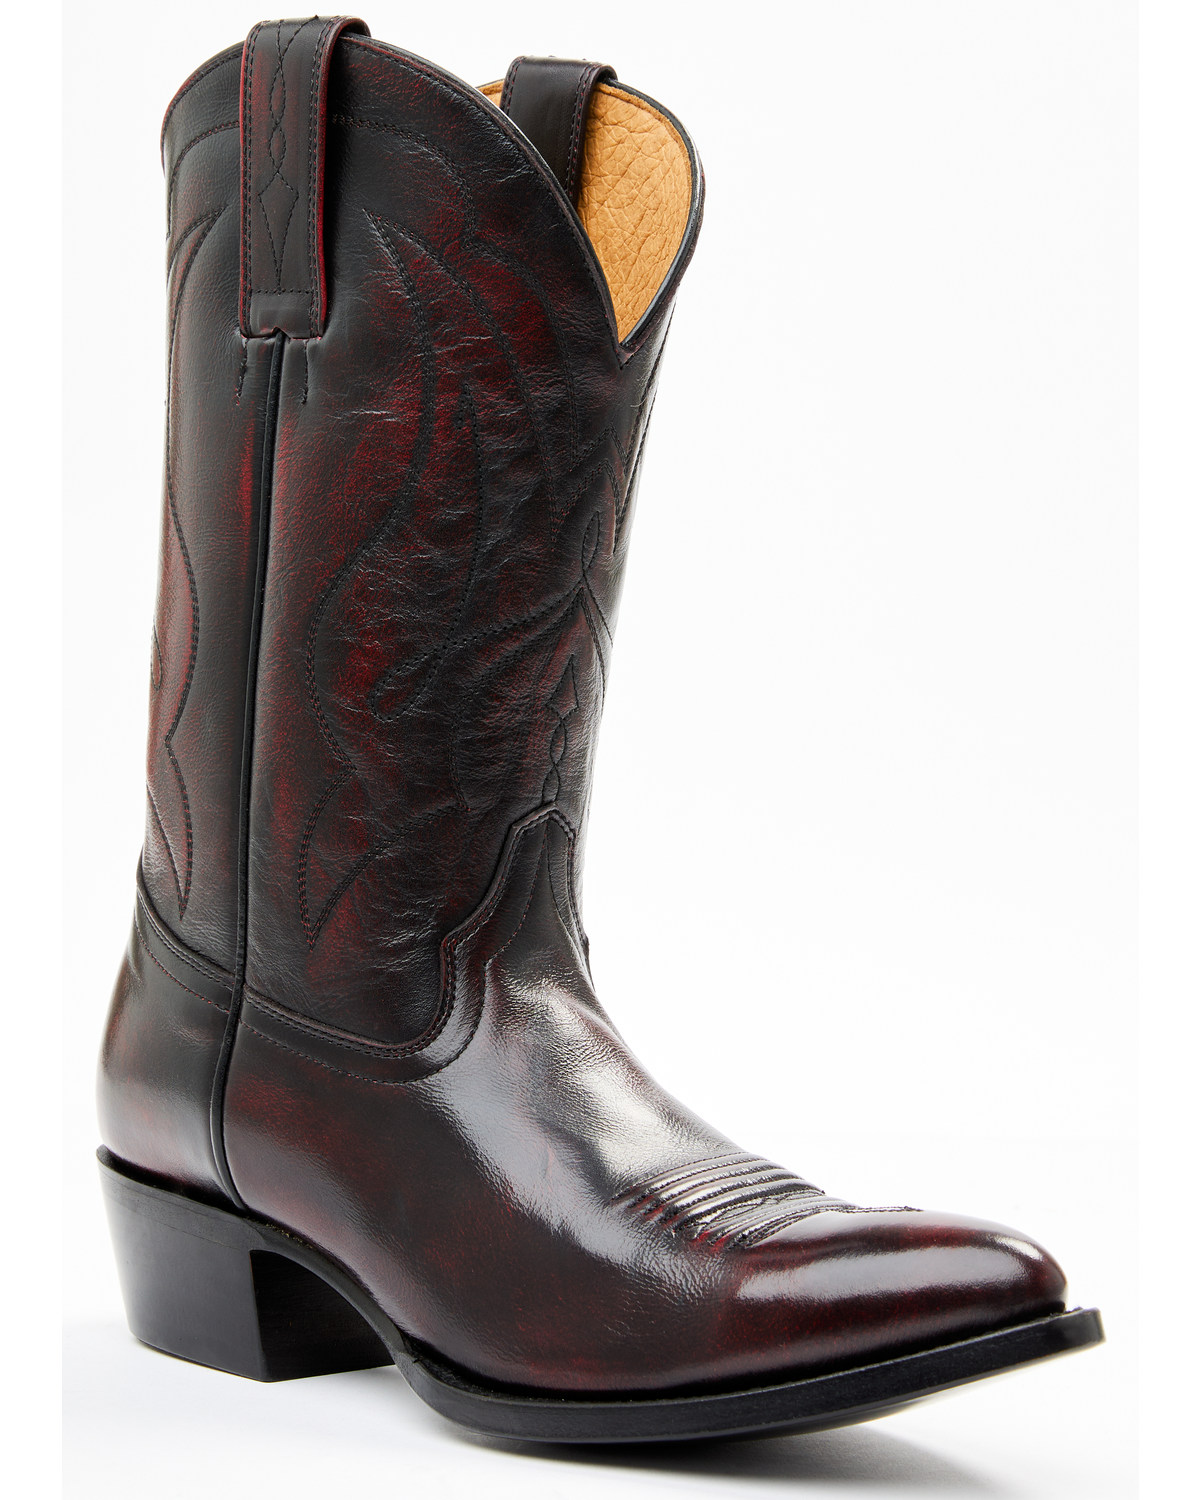 Cody James Men's Black Cherry Western Boots - Pointed Toe